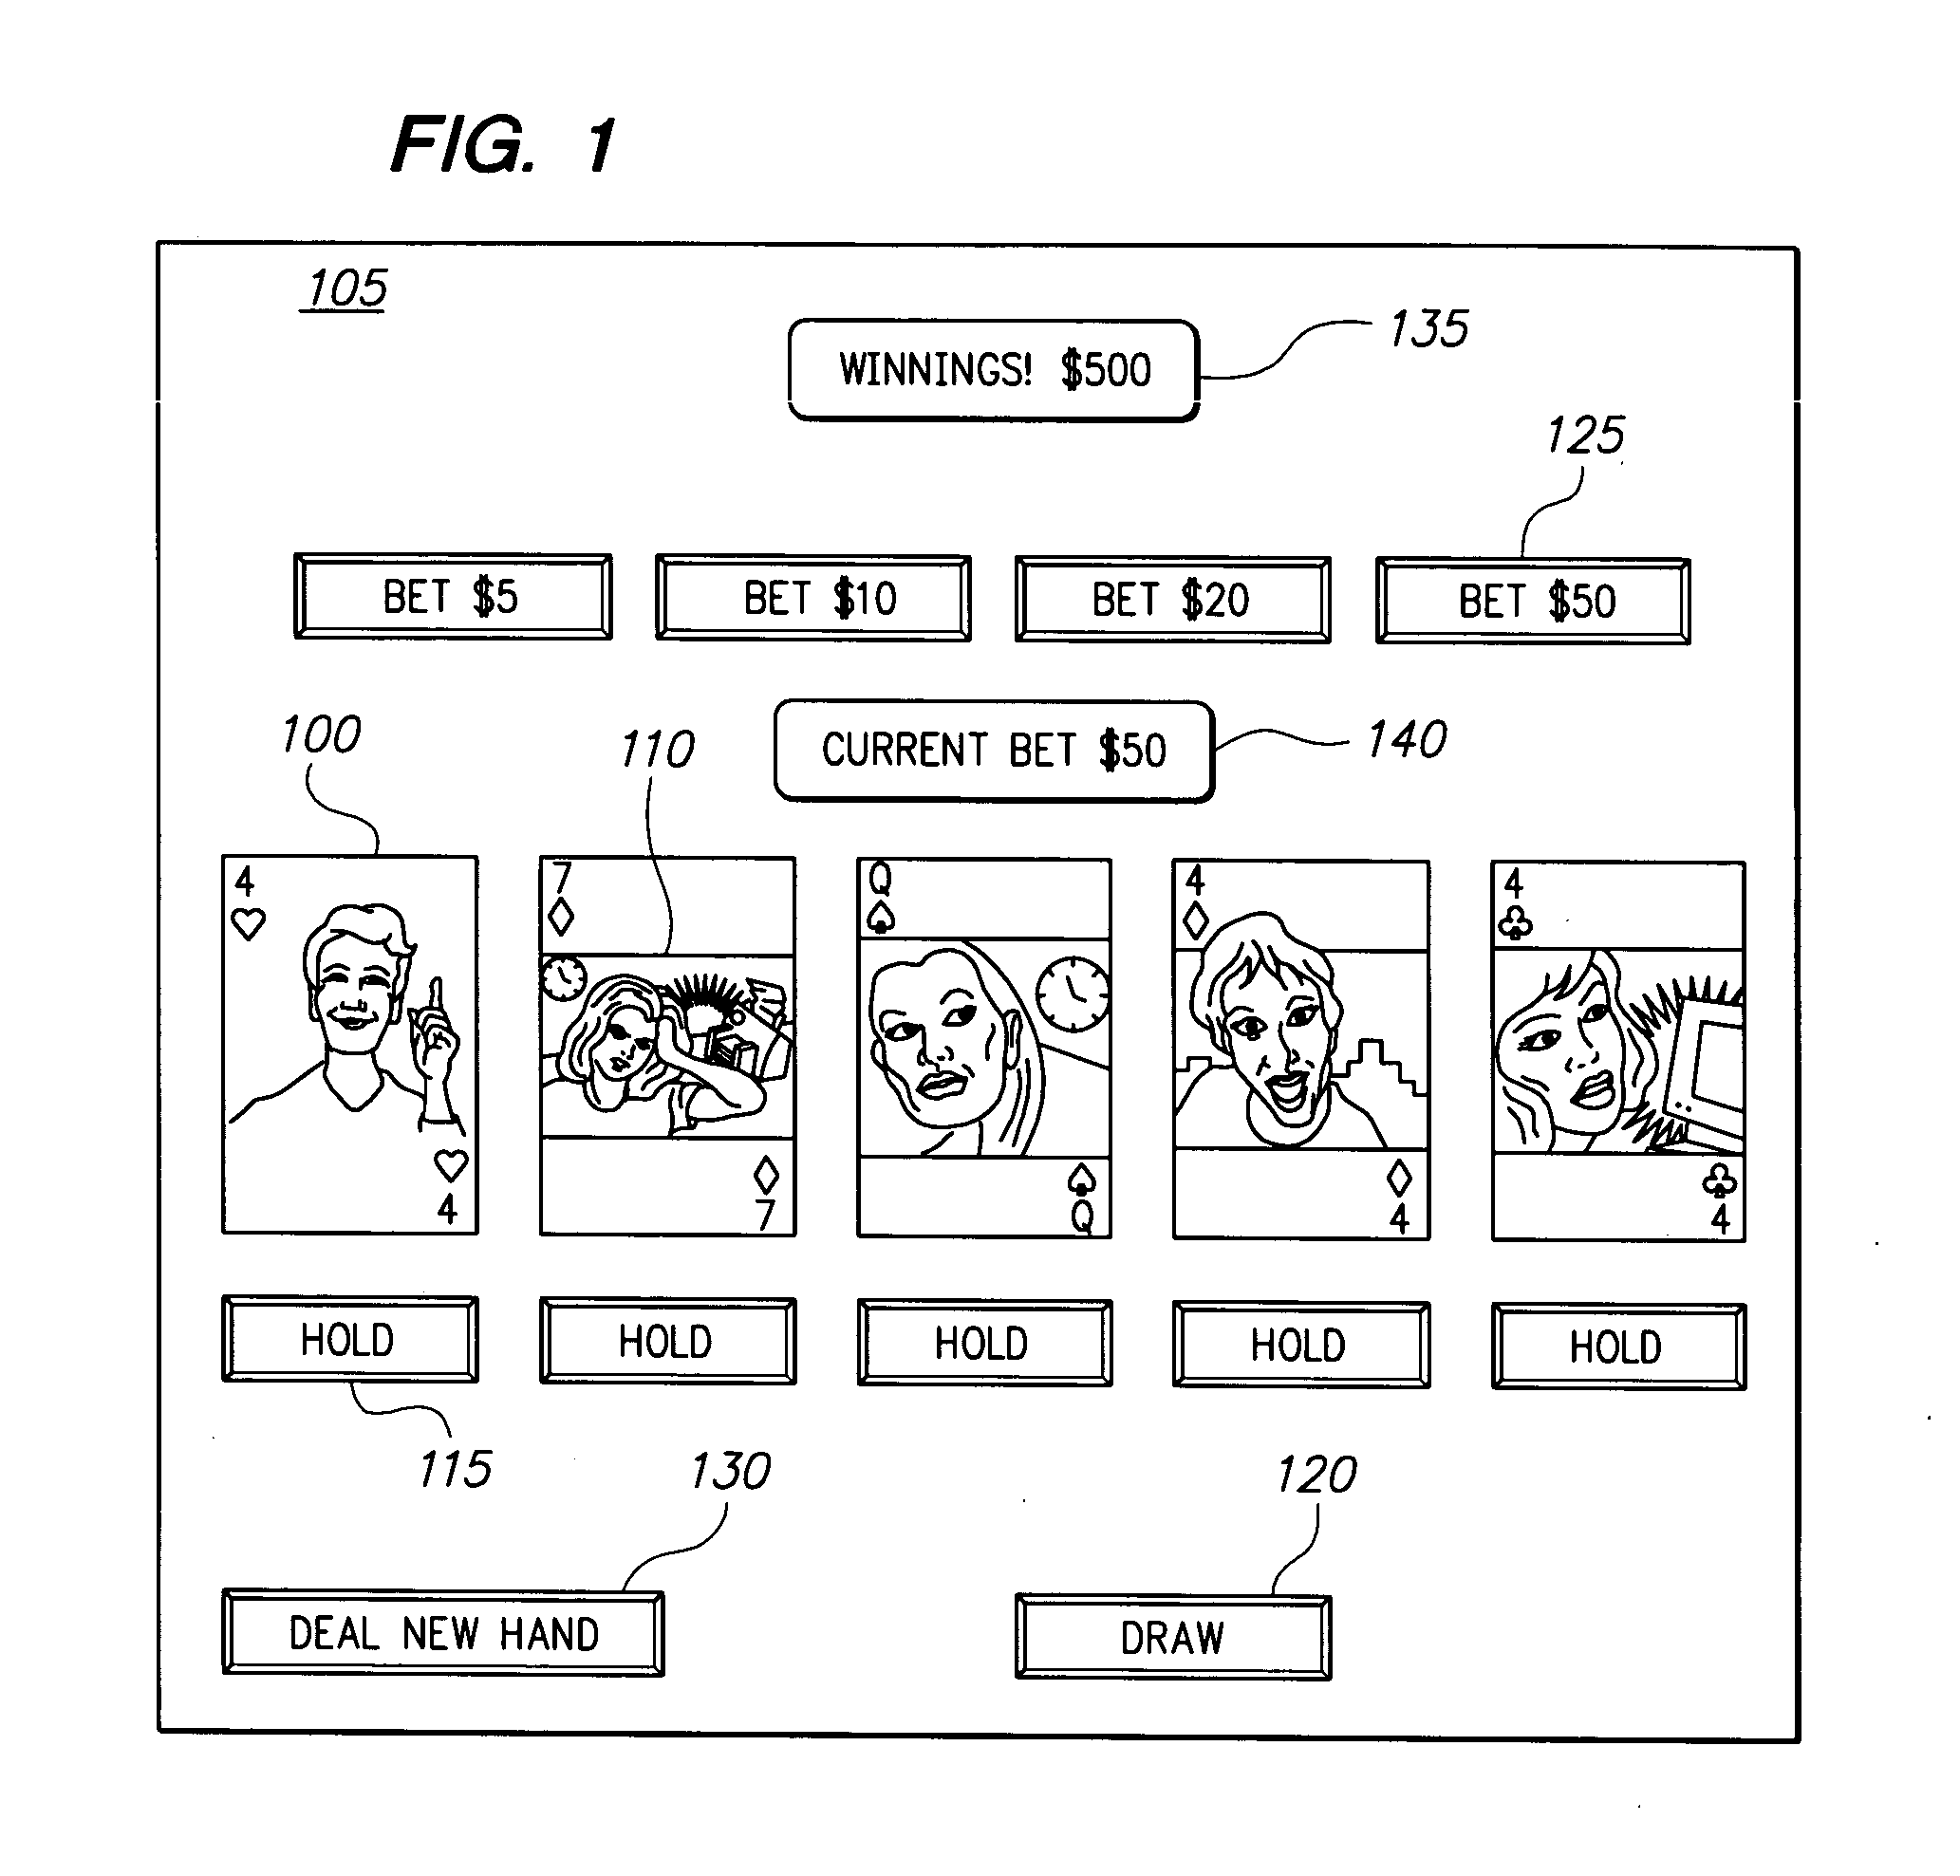 Systems and methods for providing targeted information in the context of electronic gaming